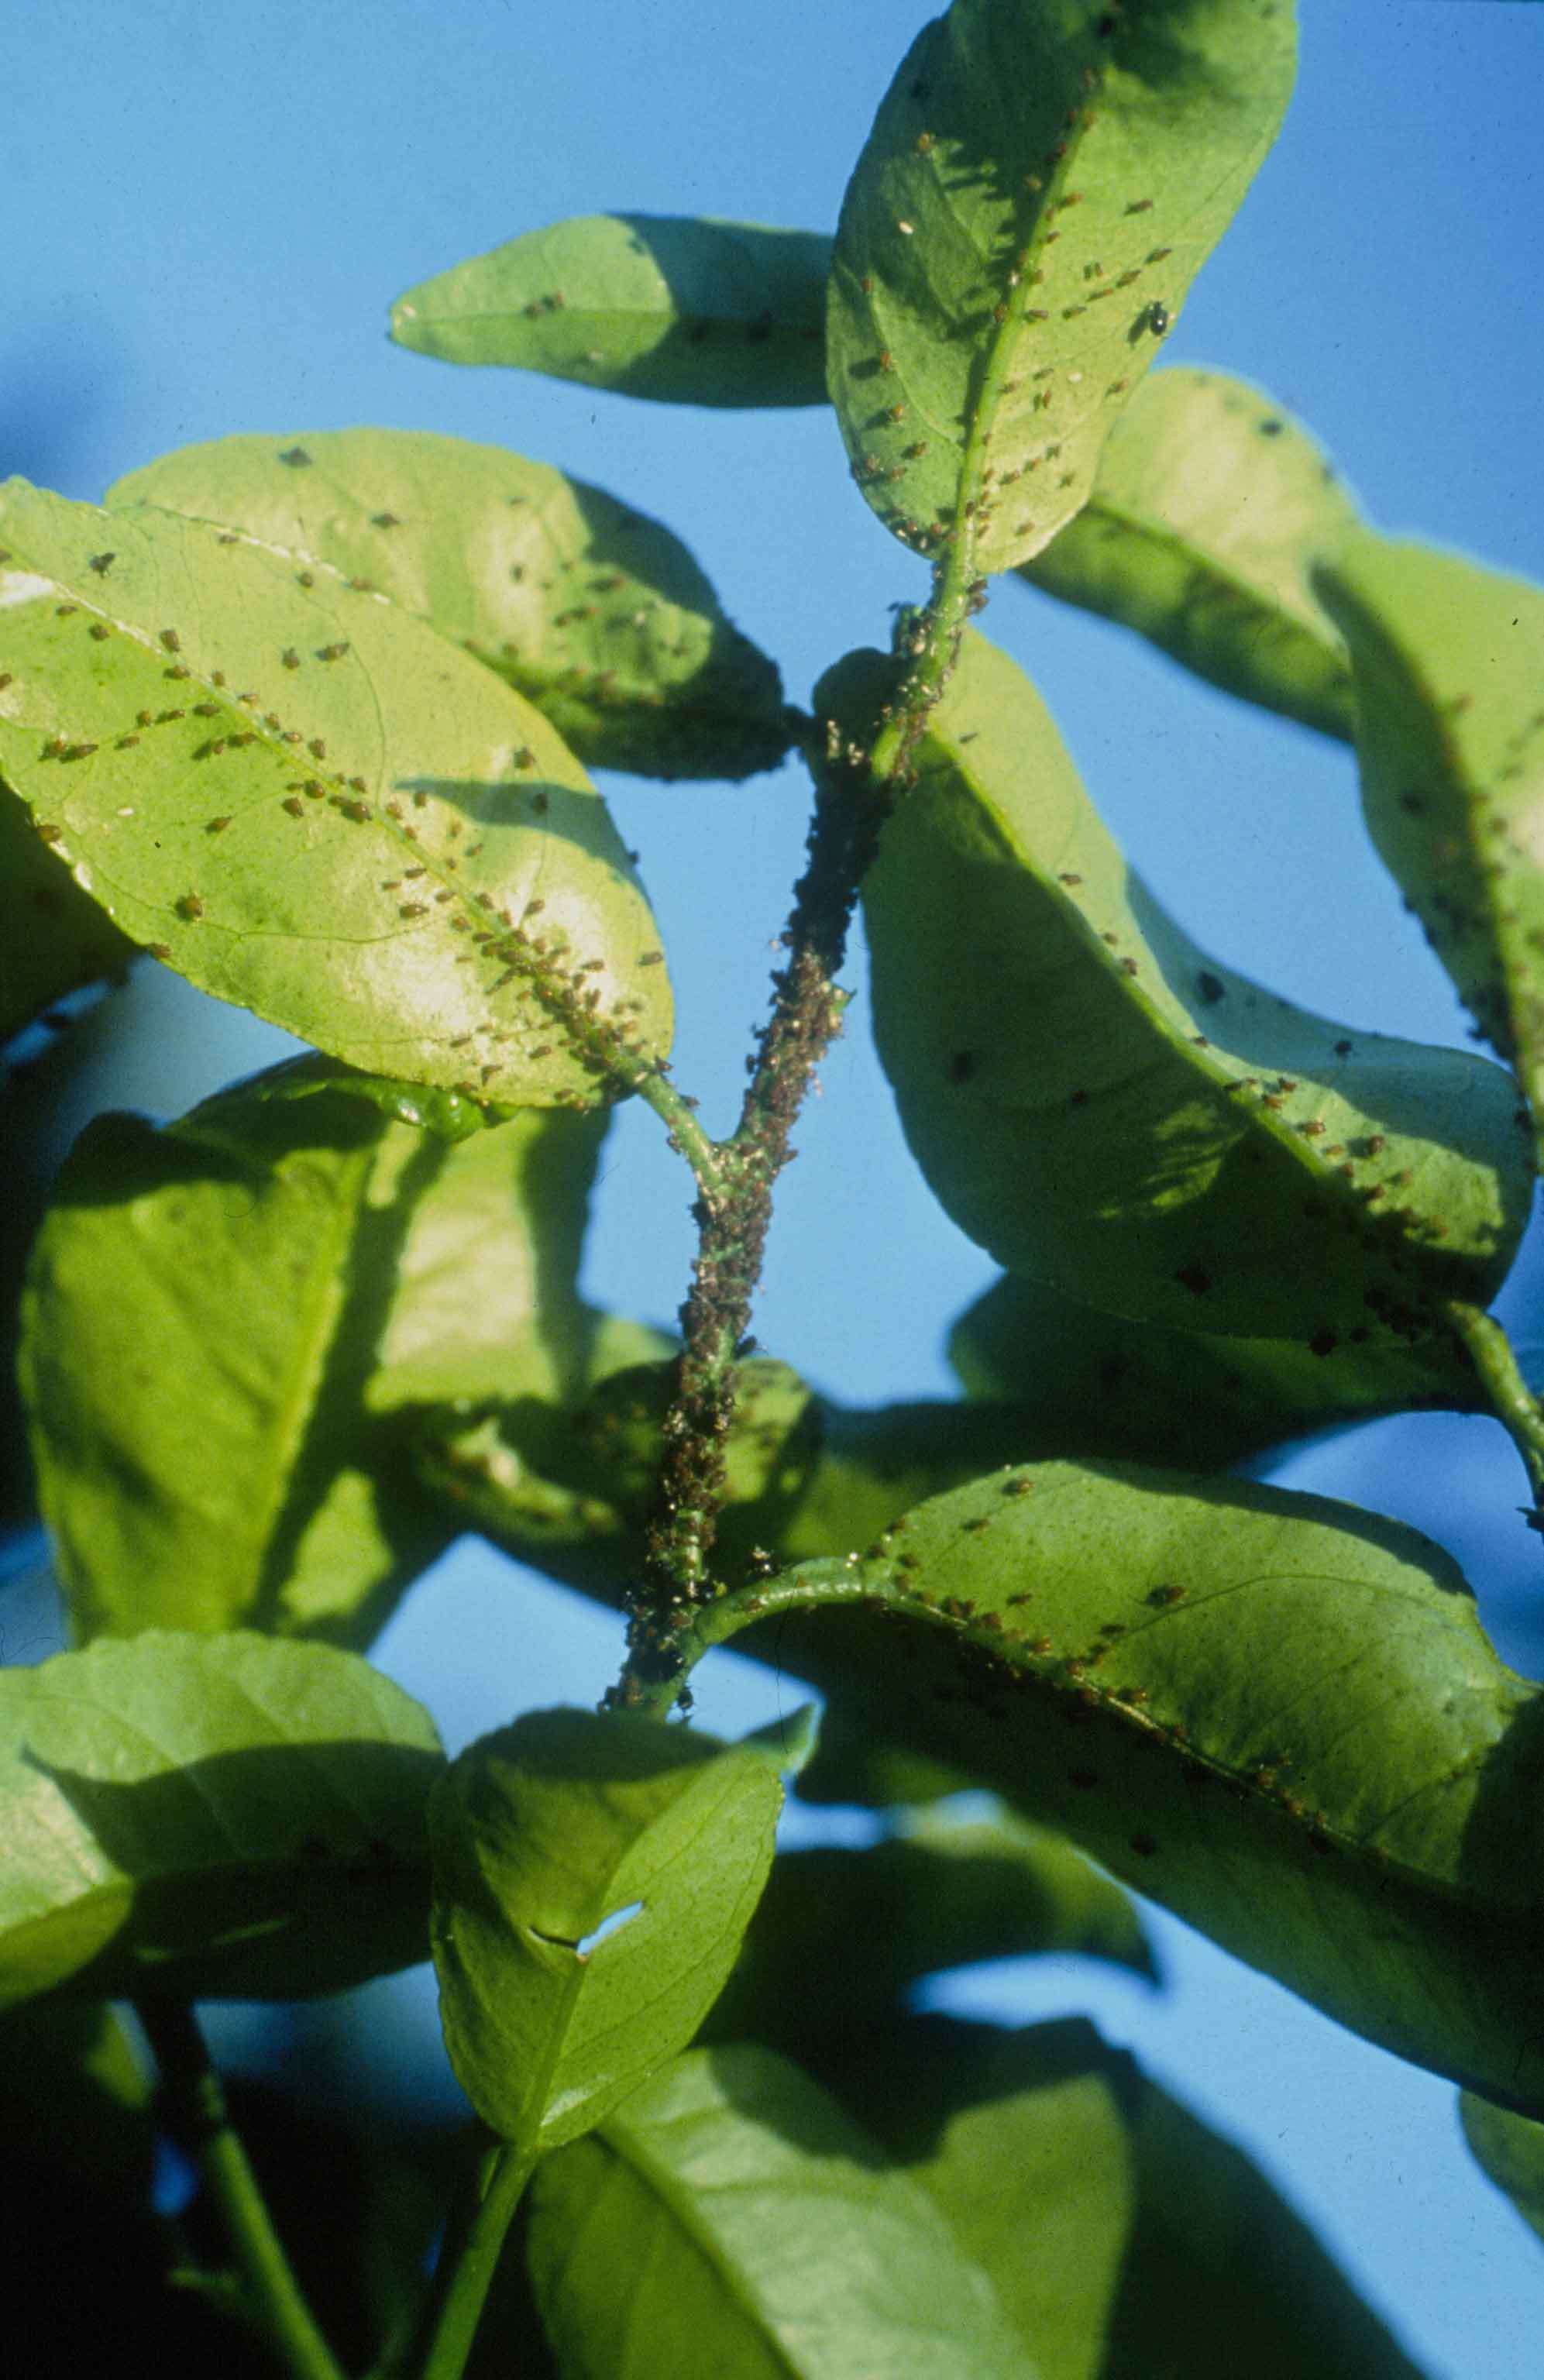 Figure 3. Toxoptera citricida infestation in citrus. Photo: JW Lotz, Florida Department of Agriculture and Consumer Services, Bugwood.org.